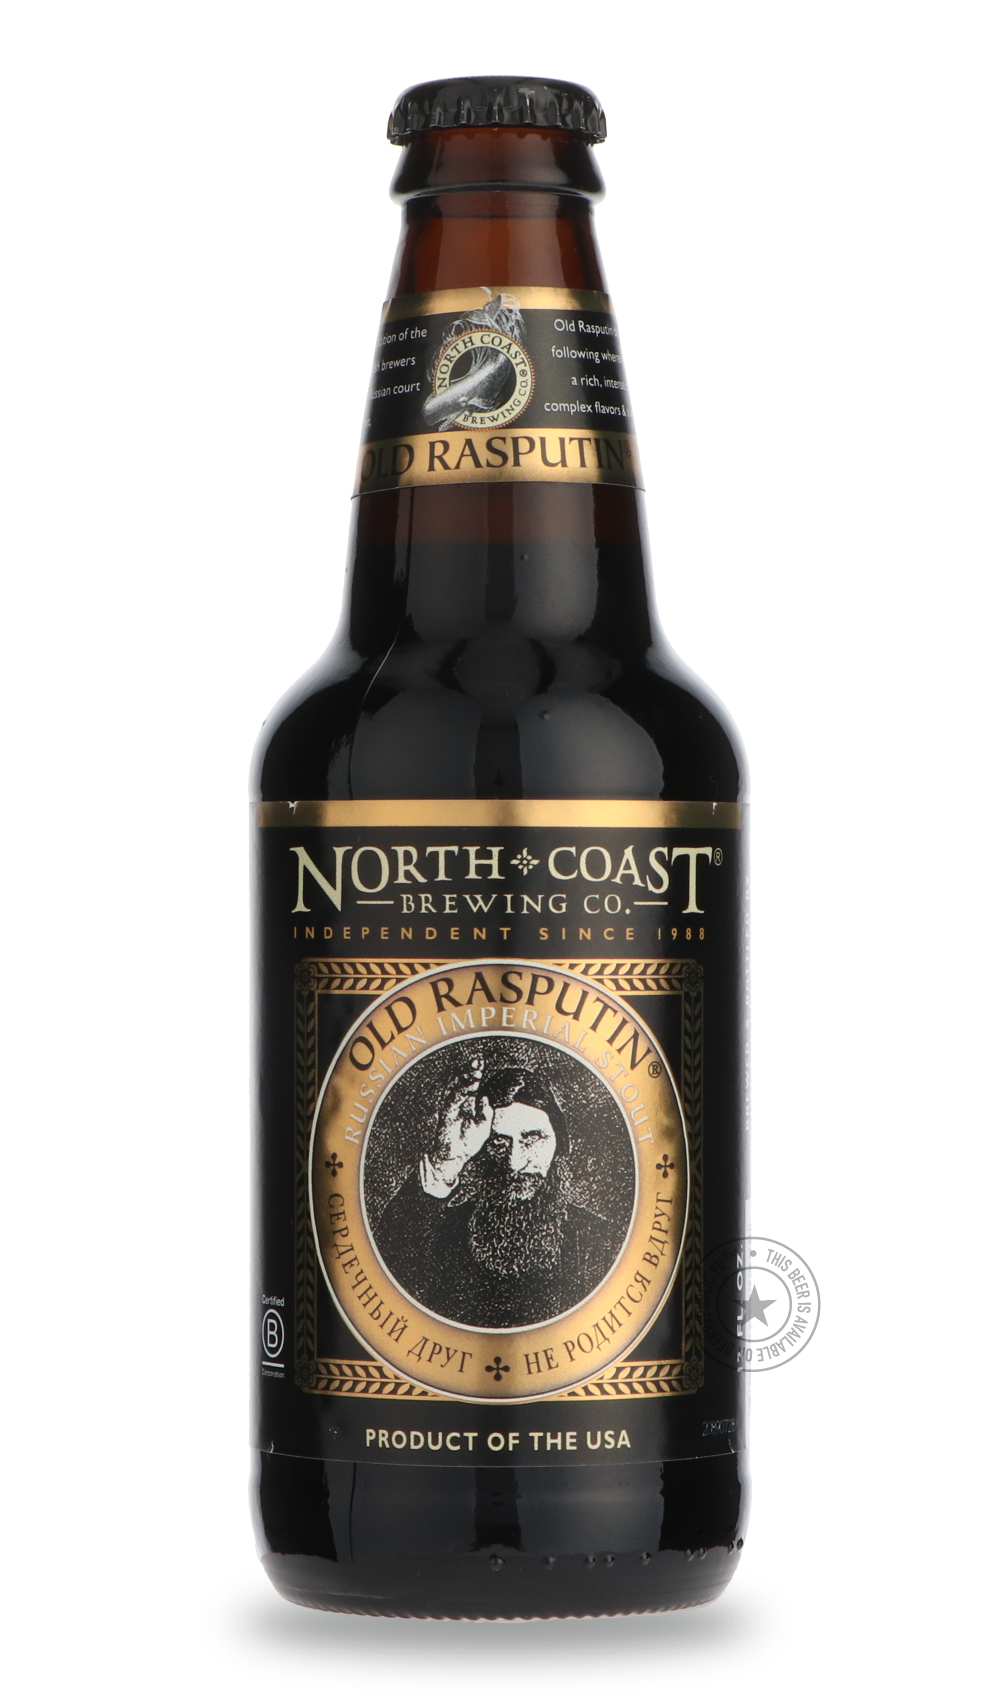 -North Coast- Old Rasputin-Stout & Porter- Only @ Beer Republic - The best online beer store for American & Canadian craft beer - Buy beer online from the USA and Canada - Bier online kopen - Amerikaans bier kopen - Craft beer store - Craft beer kopen - Amerikanisch bier kaufen - Bier online kaufen - Acheter biere online - IPA - Stout - Porter - New England IPA - Hazy IPA - Imperial Stout - Barrel Aged - Barrel Aged Imperial Stout - Brown - Dark beer - Blond - Blonde - Pilsner - Lager - Wheat - Weizen - Amb